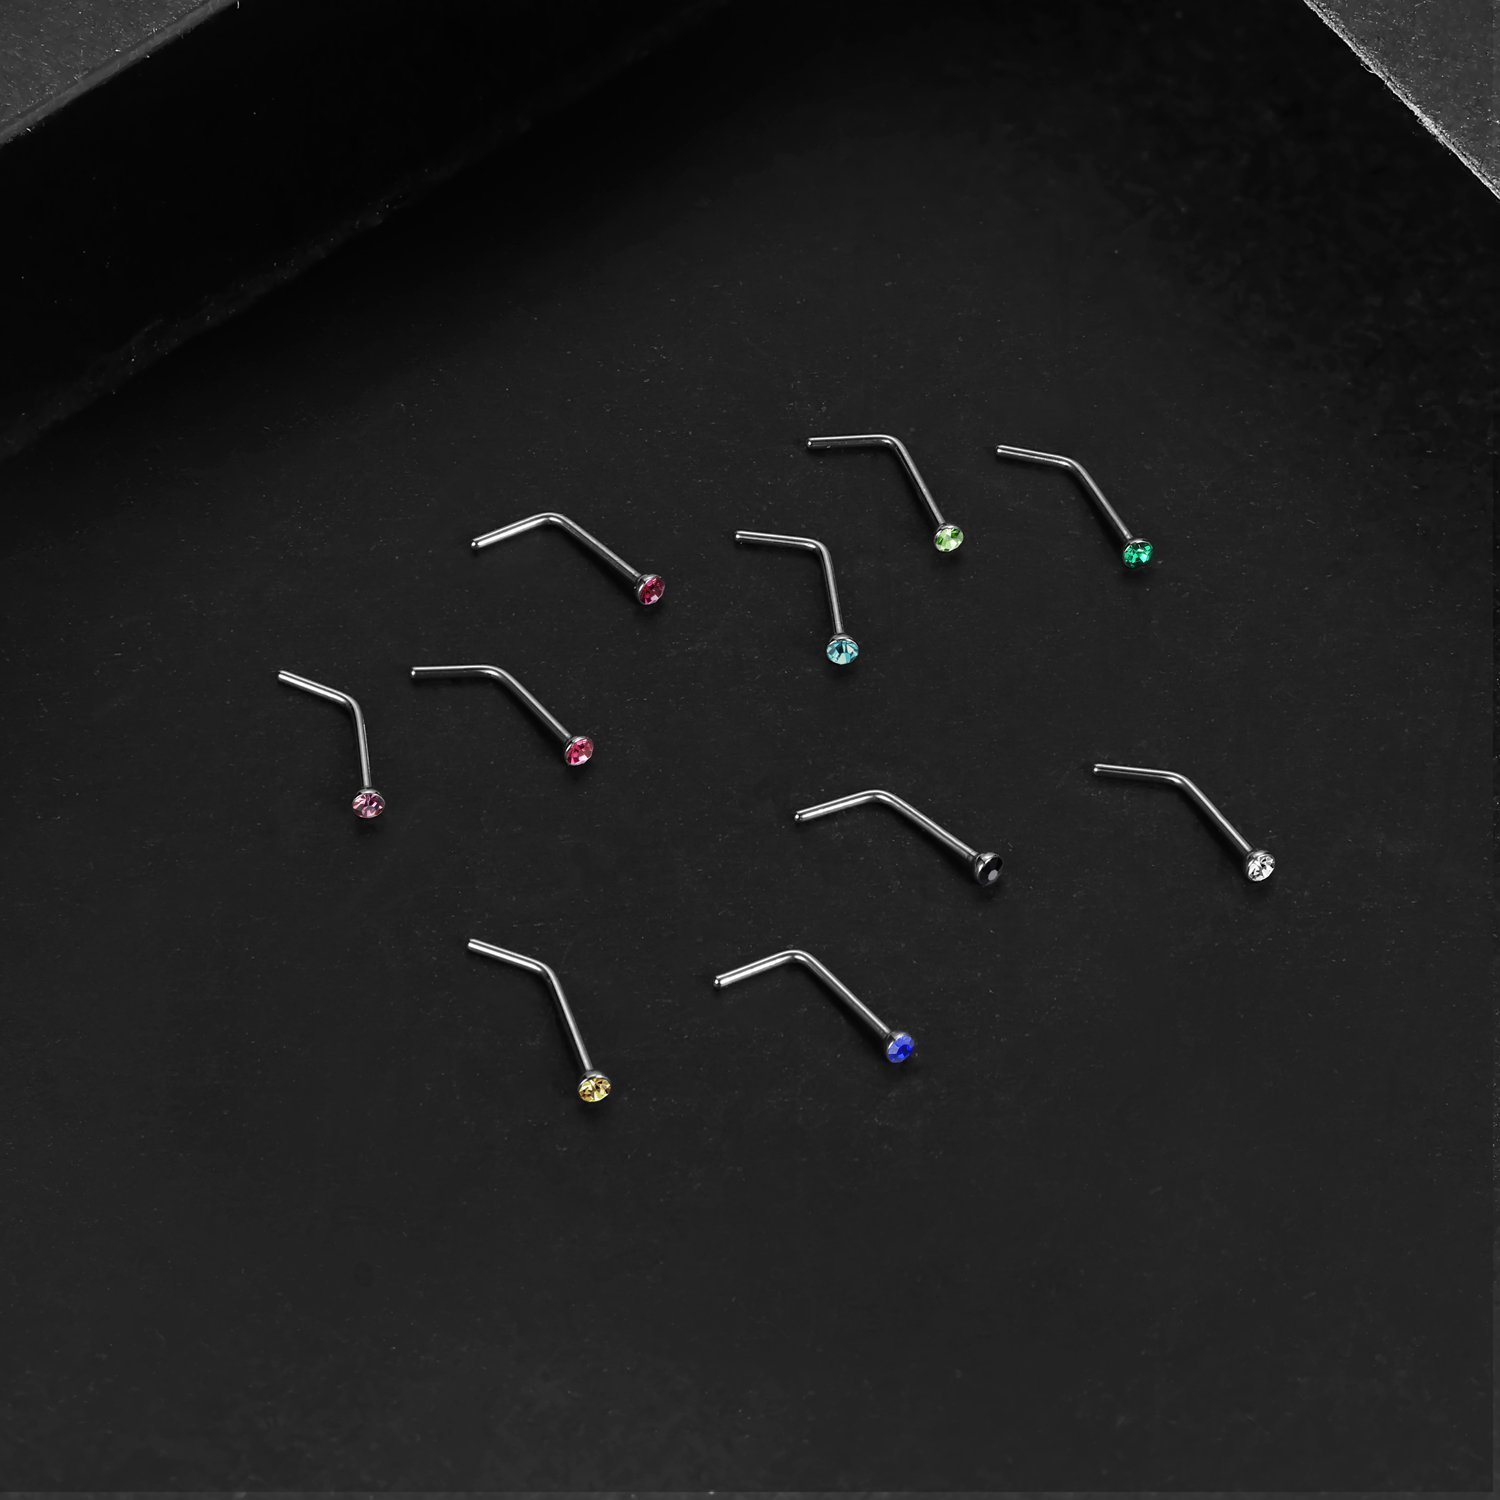 Charisma Small Nose Studs Stainless Steel Curved Nose Stud Bend L Shape Colorful Nose Ring Screw Piercing Jewelry Tiny Bone Studs for Women Men Hypoallergenic 20G